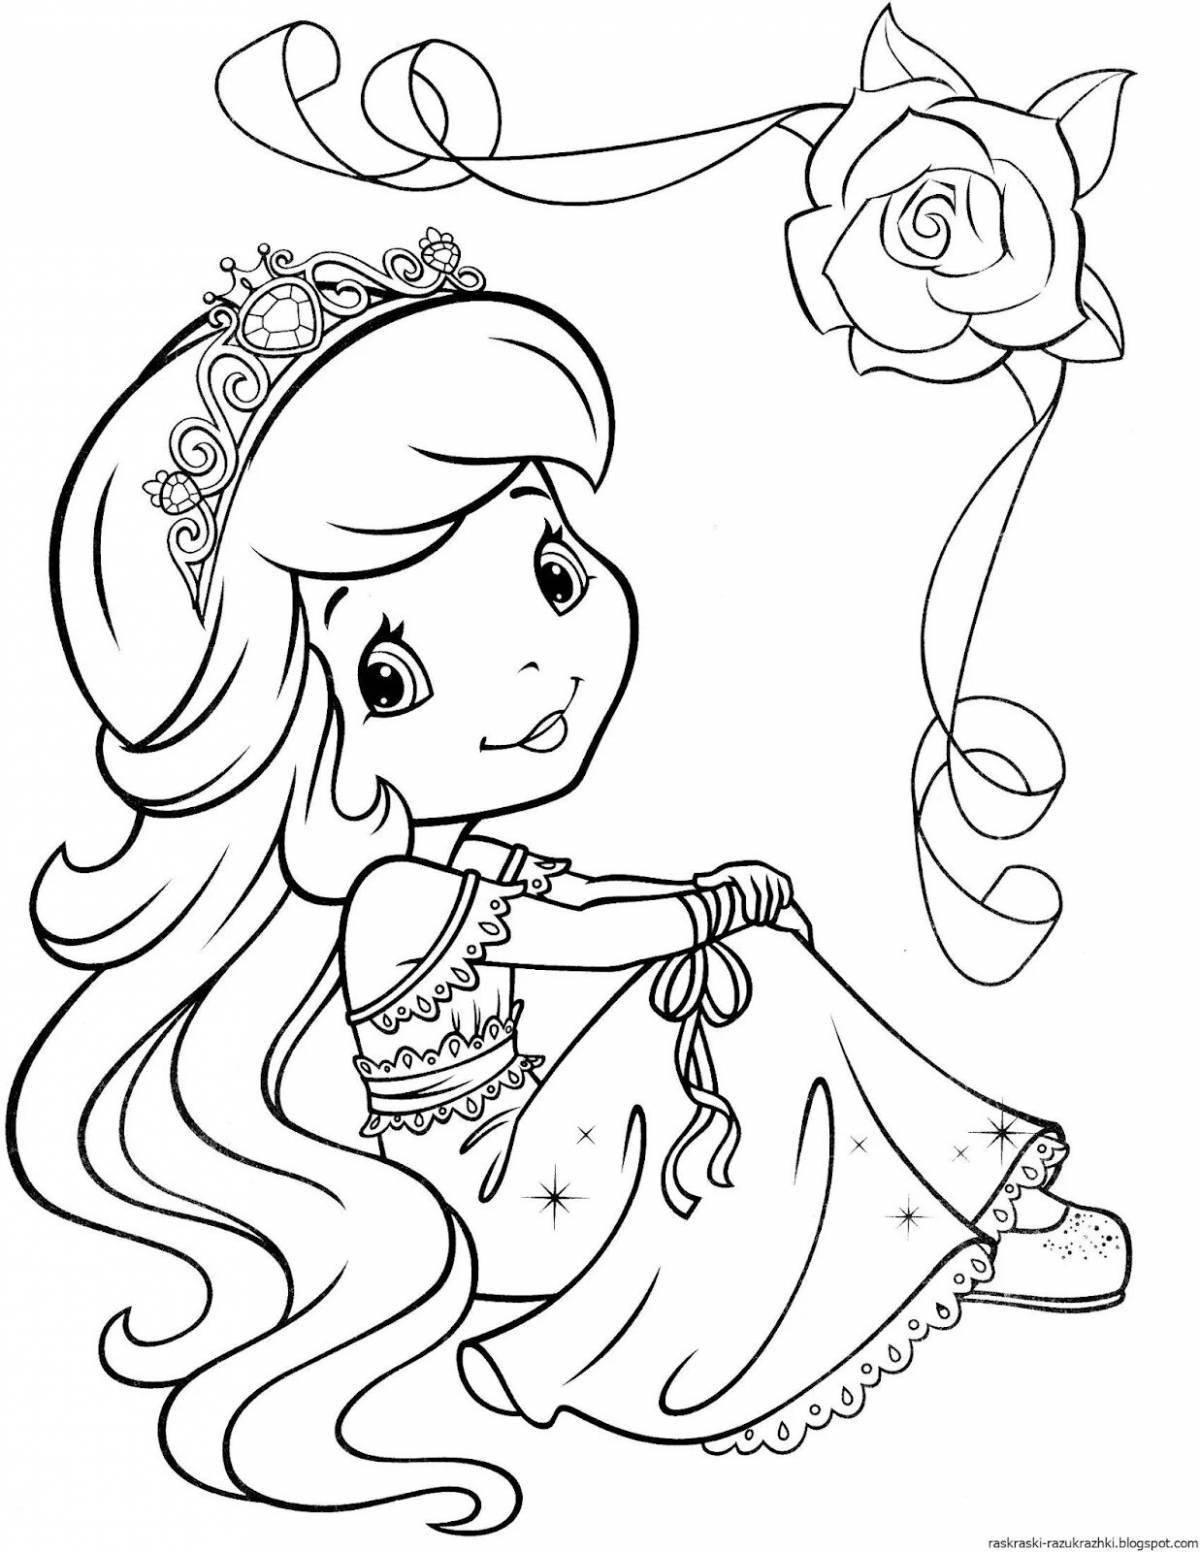 Printed glitter coloring book for girls 5-6 years old